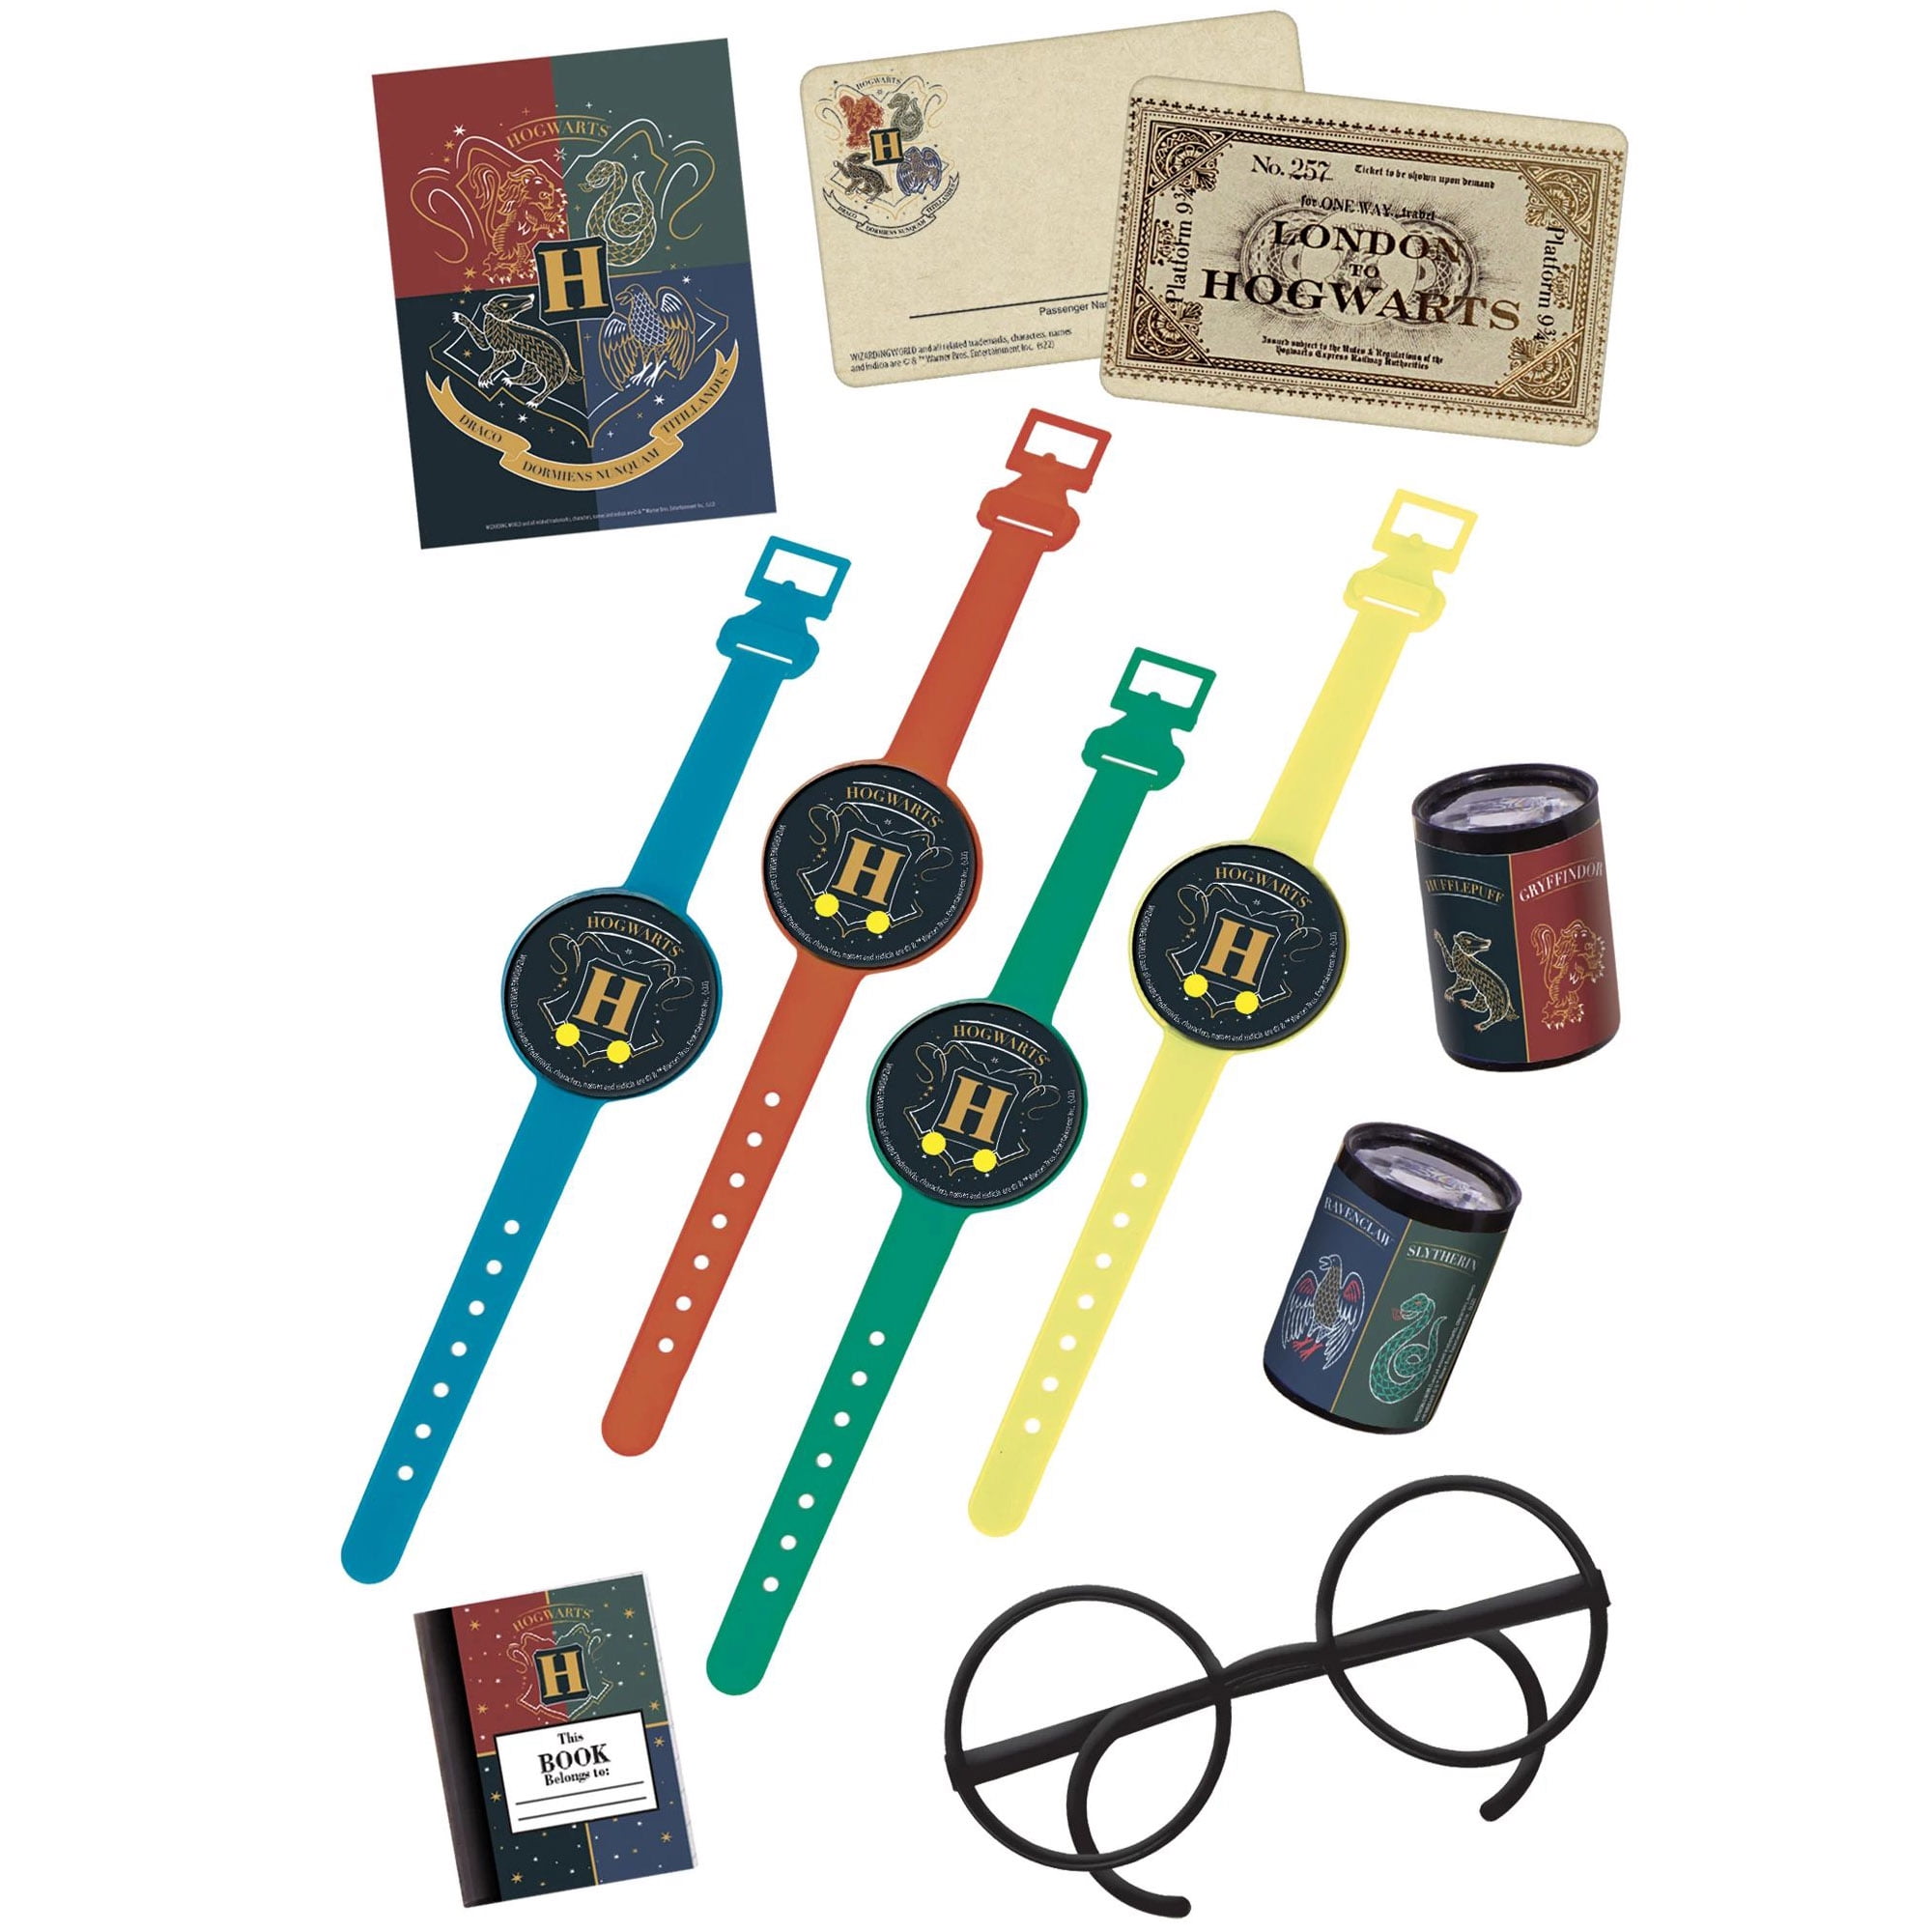 Party Favors! Harry Potter party favors everyone will LOVE! Fun, creative  and uniqu…